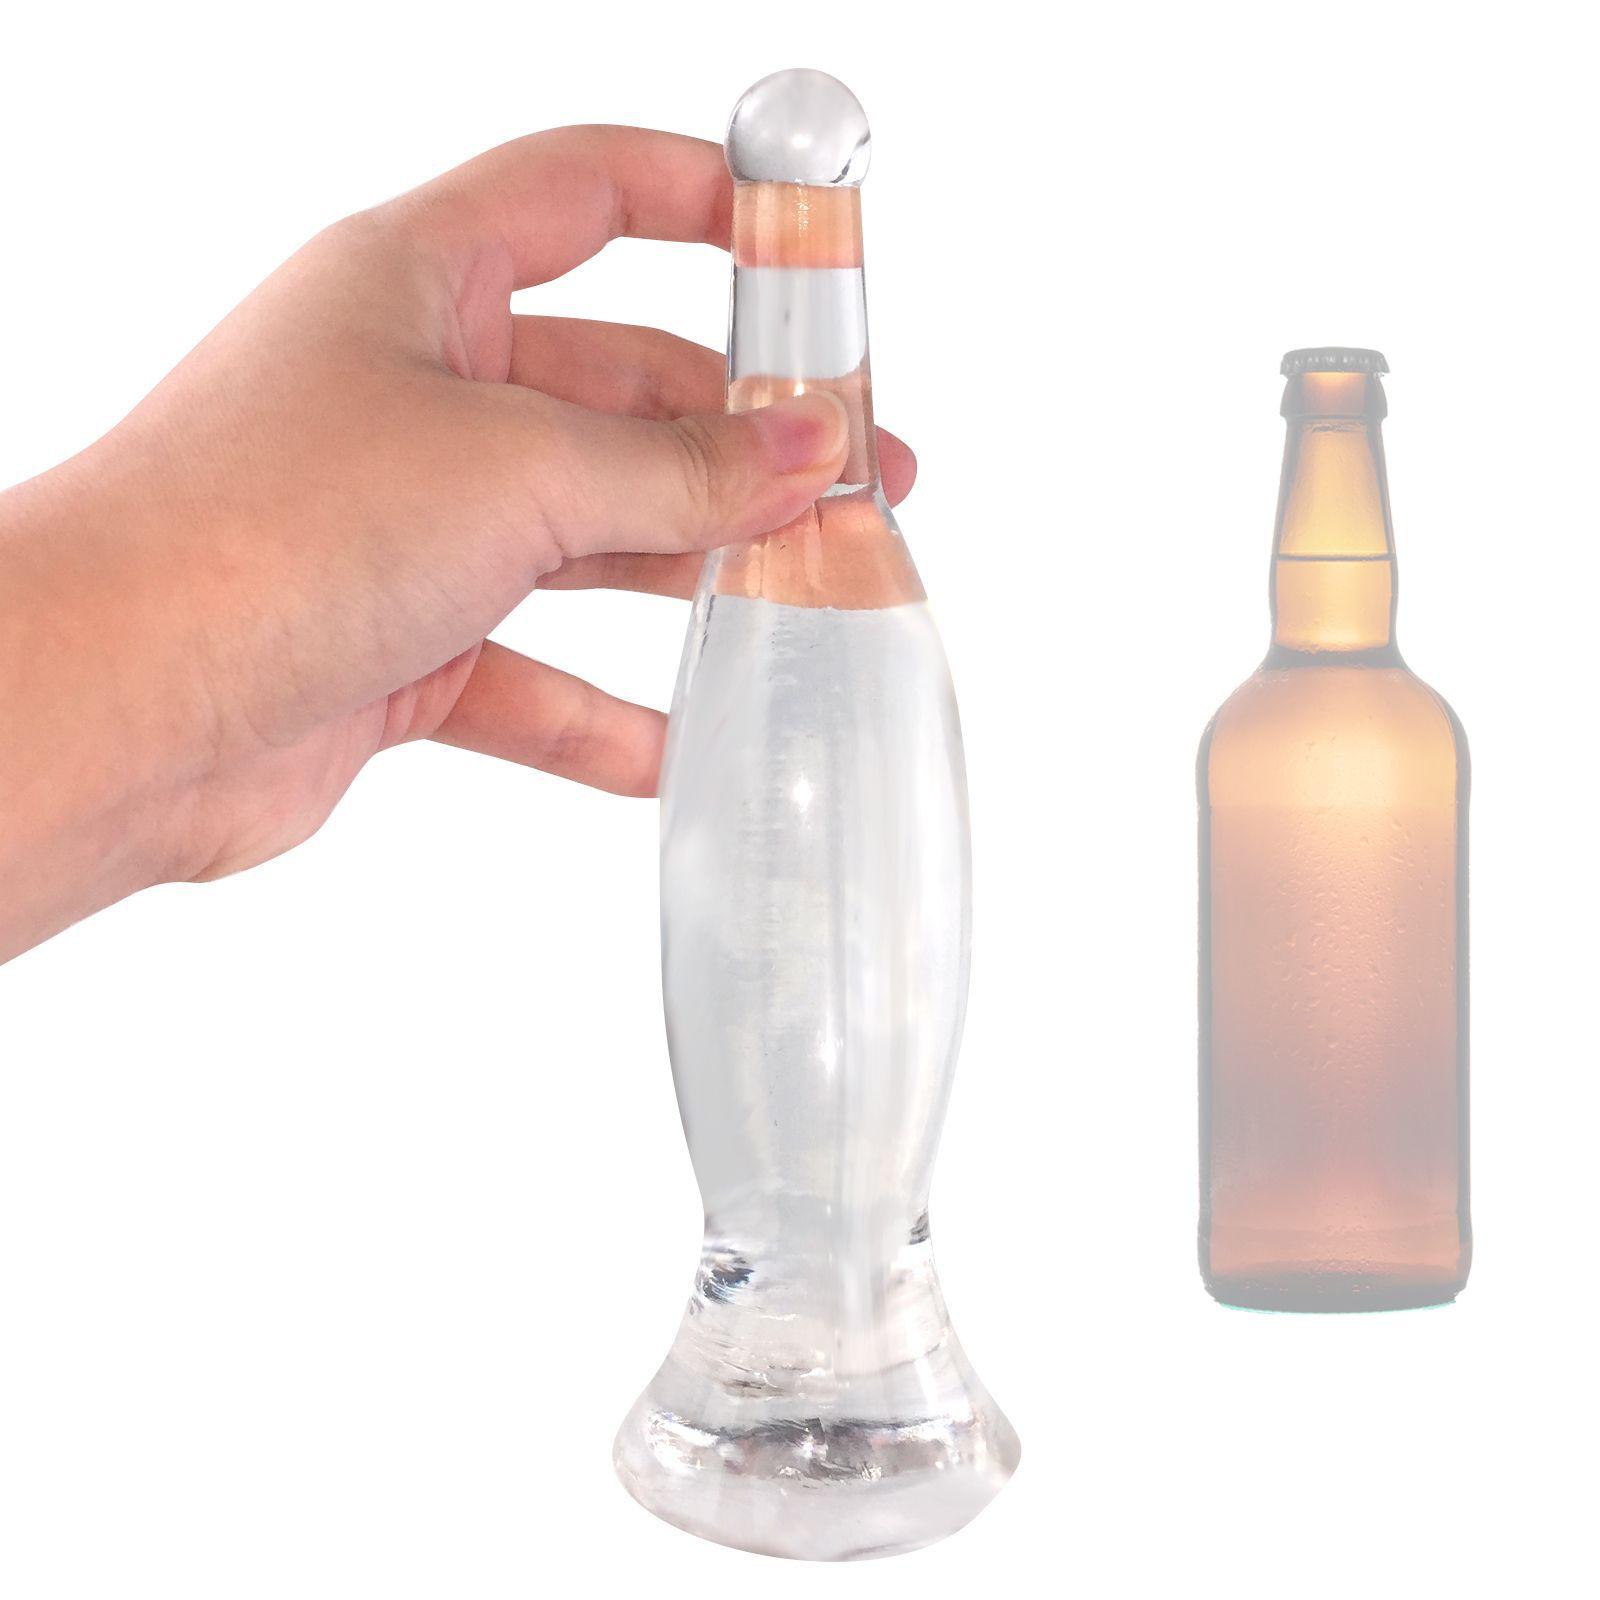 20-27.5 Cm Novel Beer Bottle Shape Xxl Huge Anal Plug Set Butt Plugs Trainer Anus Intercourse Sexy Toy For Men Women And Couple